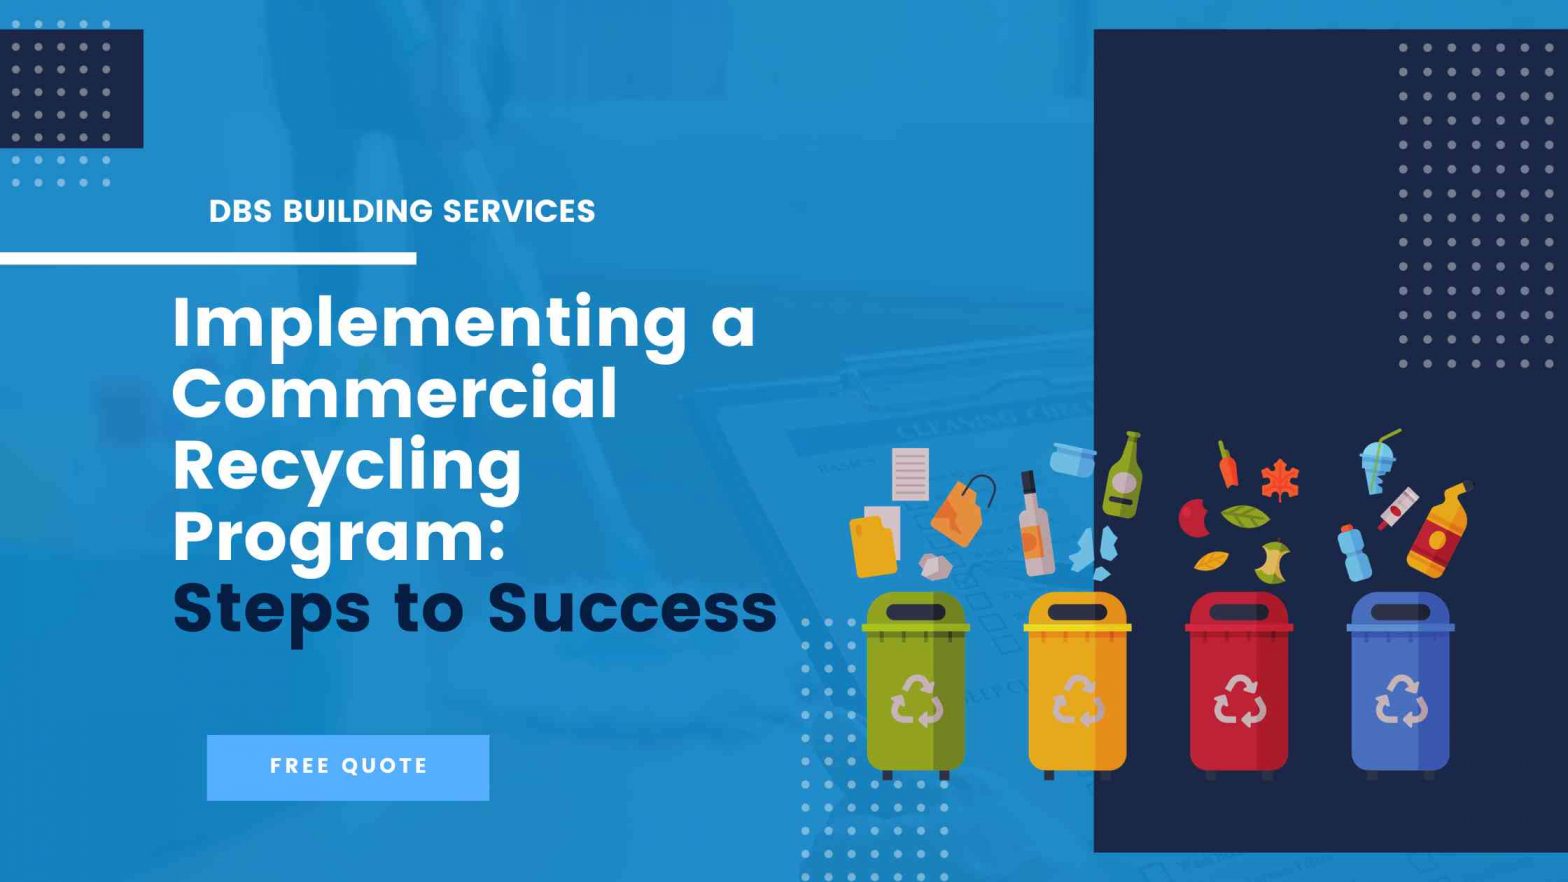 Commercial recycling program implementation